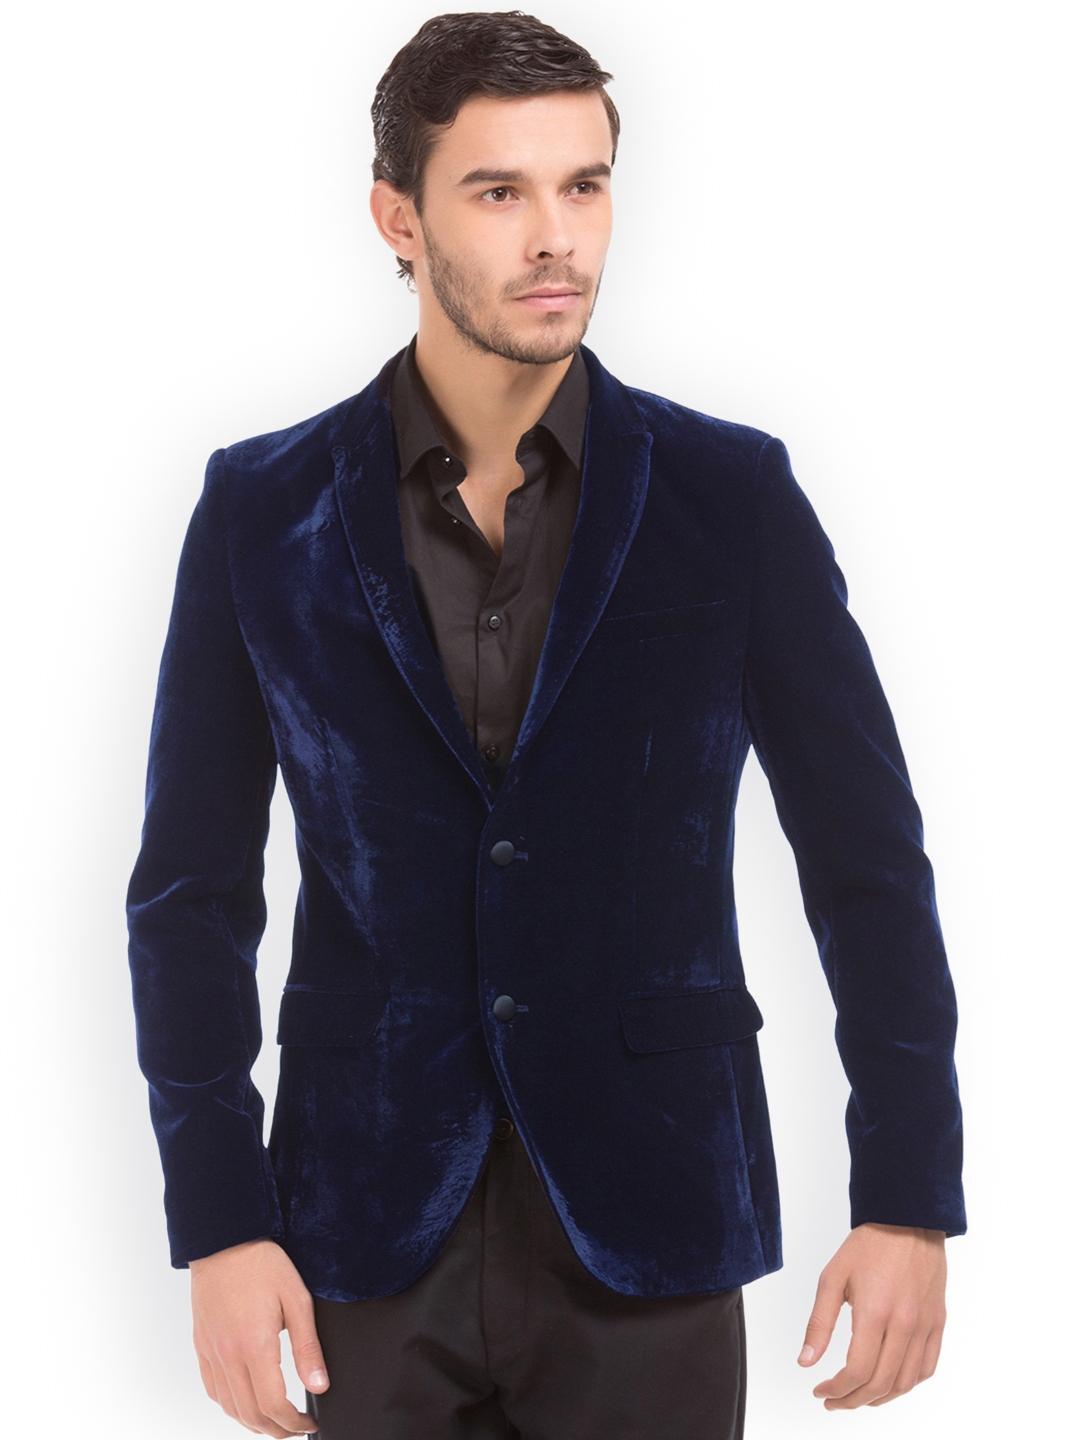 How to Wear a Velvet Jacket – XPOSED